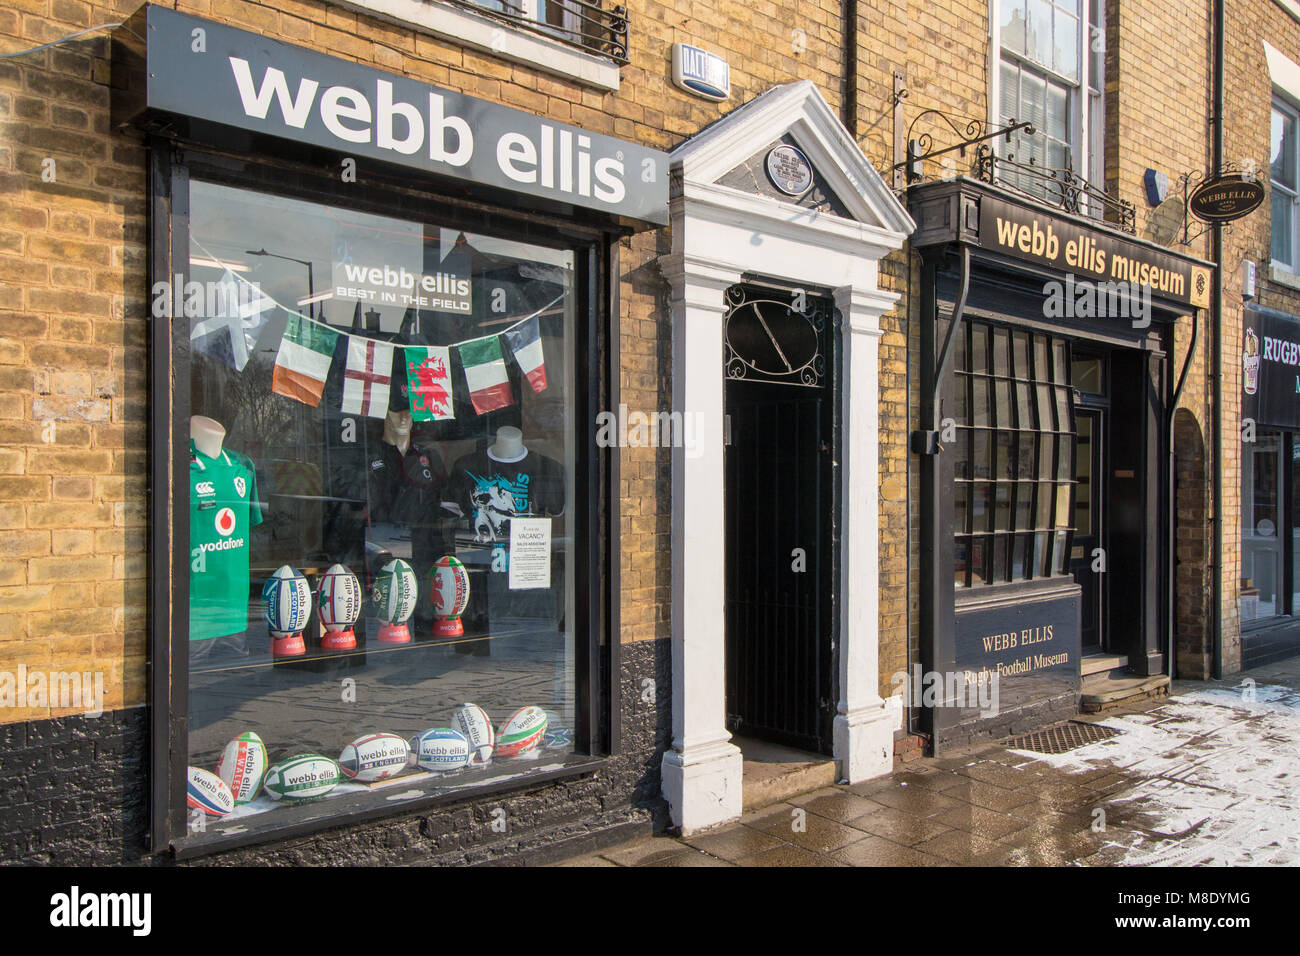 The Webb Ellis Museum in the centre of Rugby. The museum sells replica rugby balls and memorabilia about the game of Rugby. Stock Photo